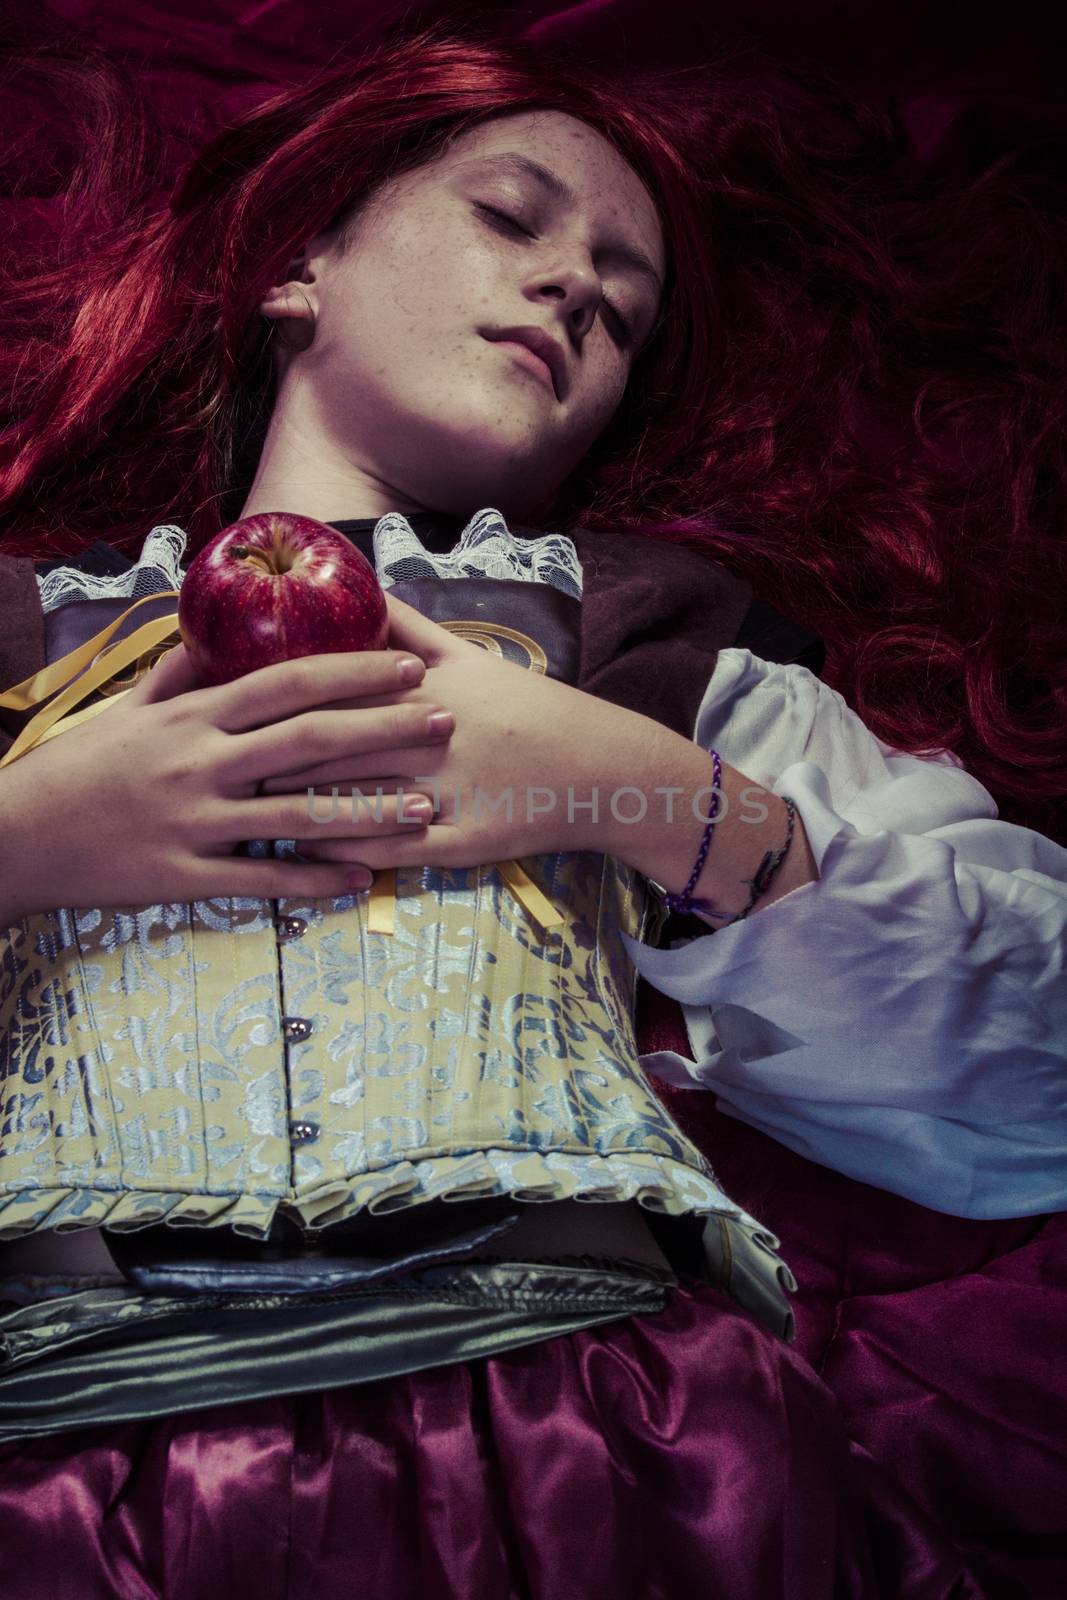 Fairytale, Teen with a red apple lying, tale scene by FernandoCortes